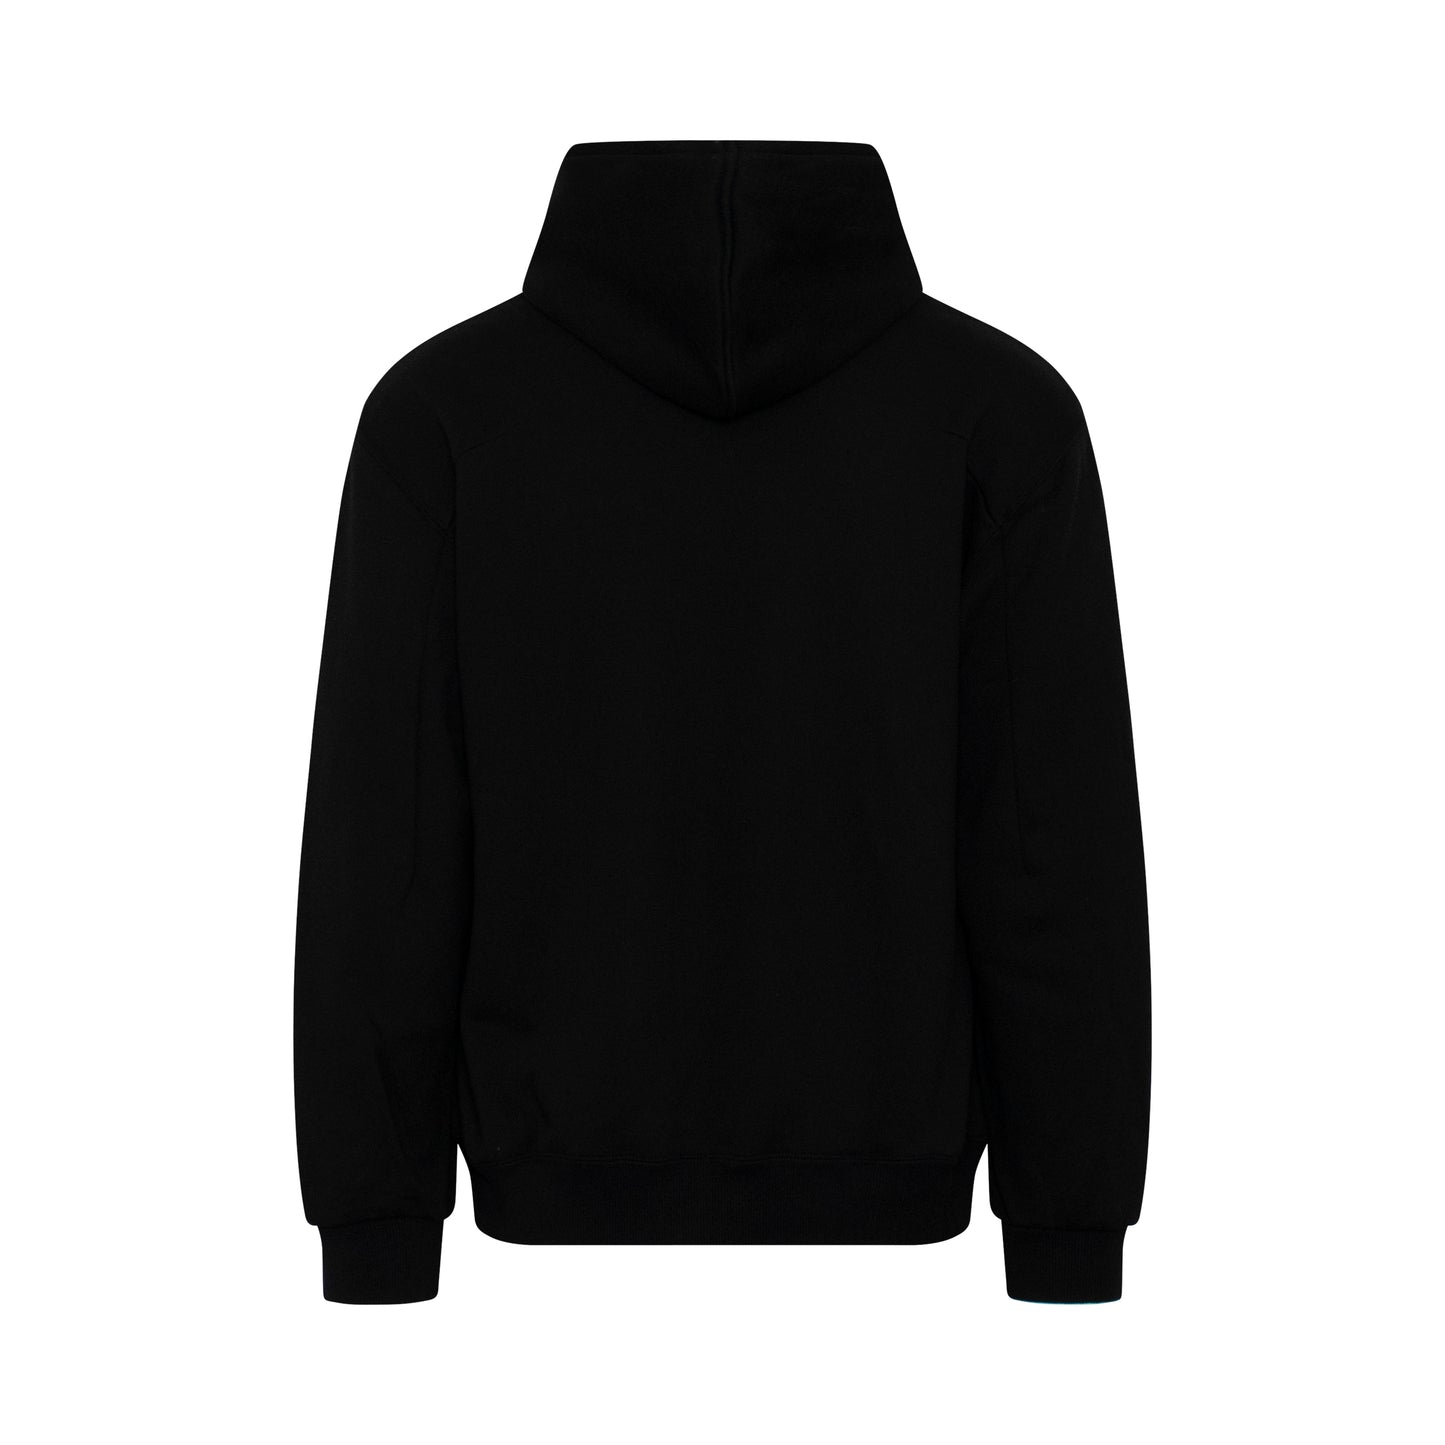 Puppet Embroidery Hoodie in Black